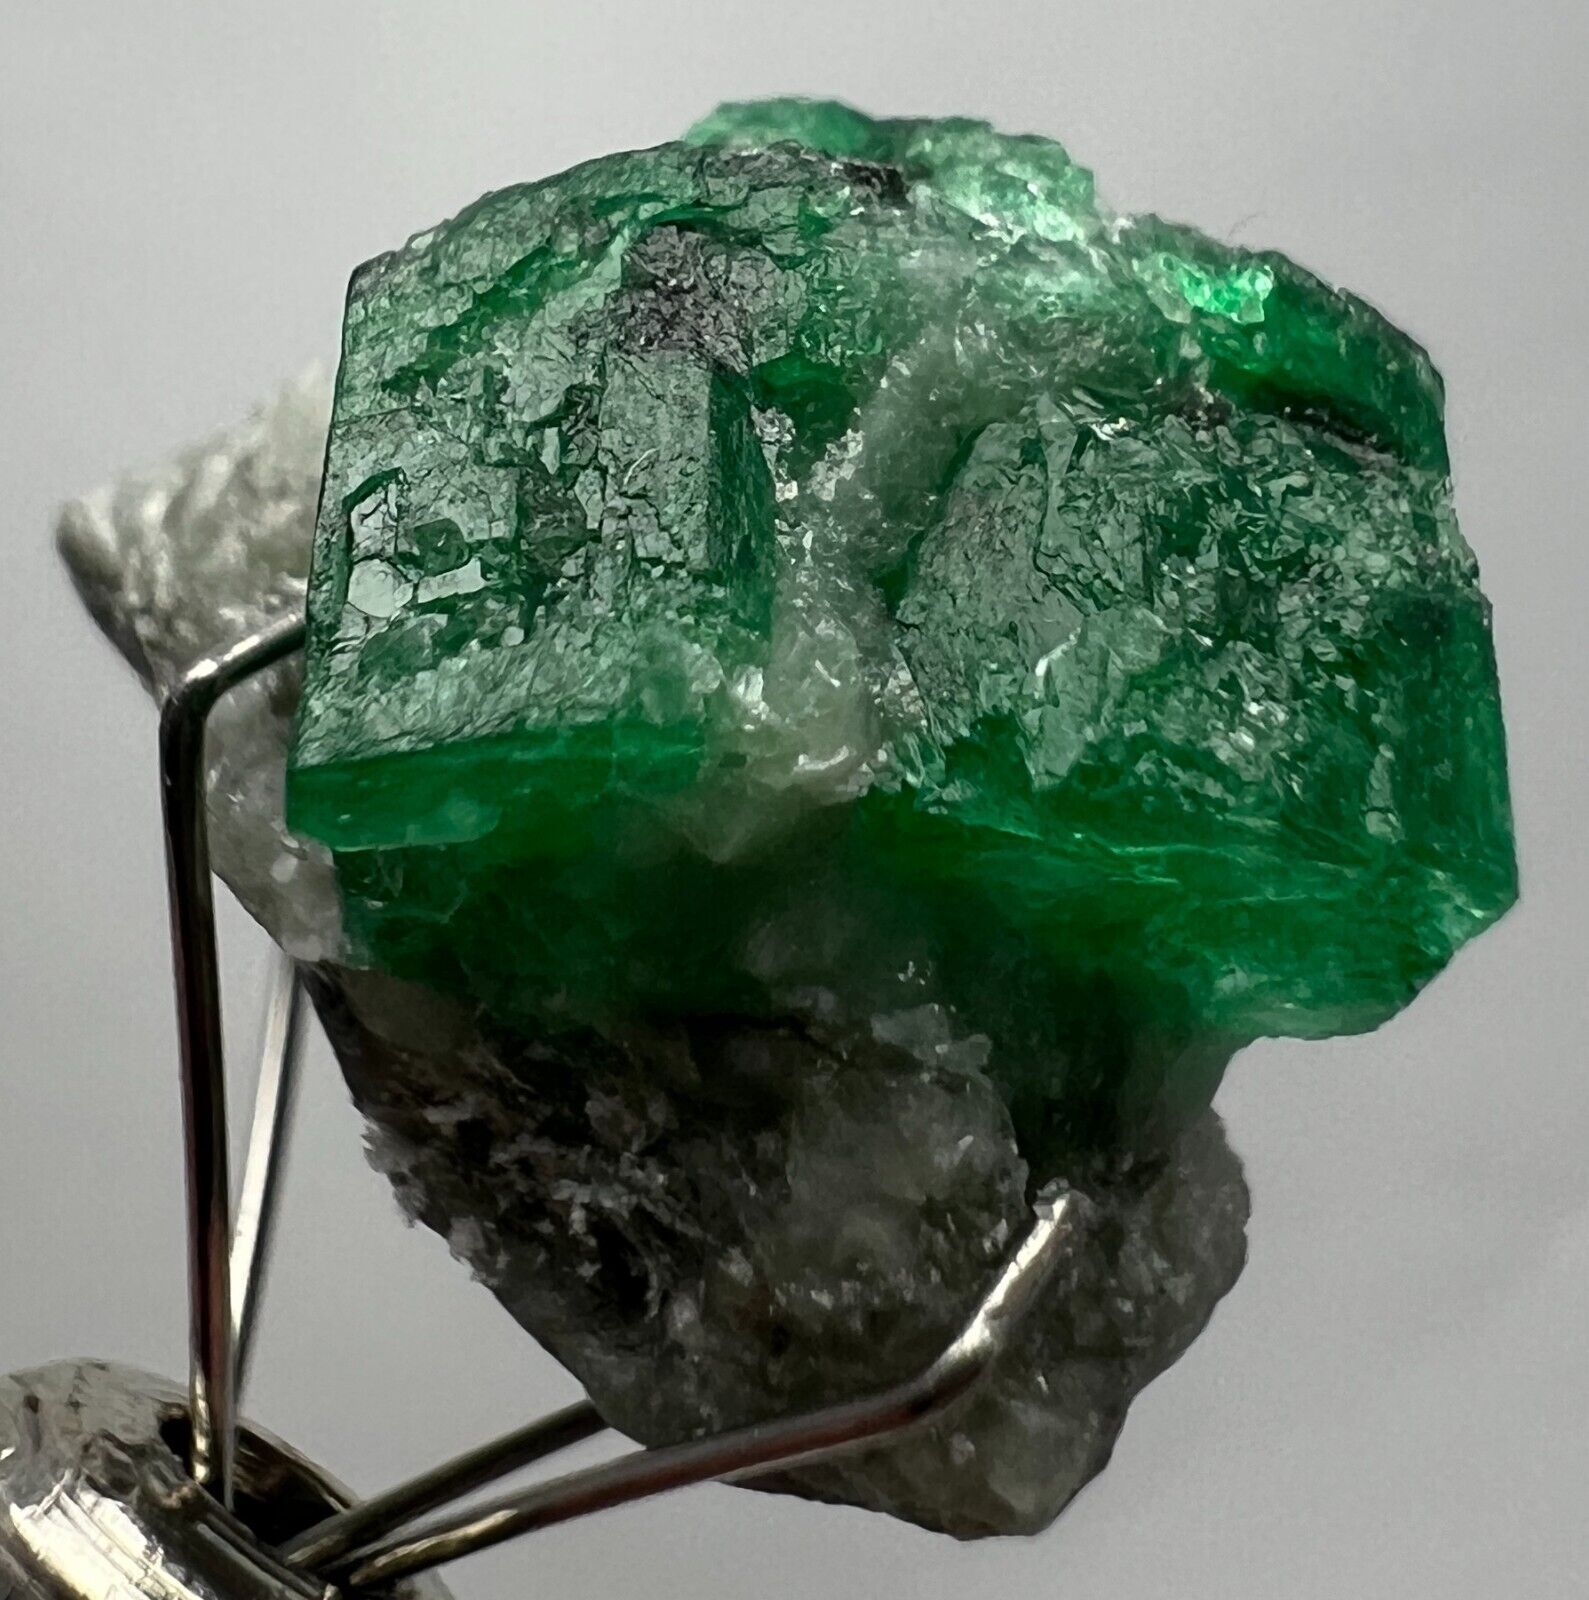 Well Terminated Top Green Very Beautiful Emerald Crystal on Matrix @Swat, 15 CT